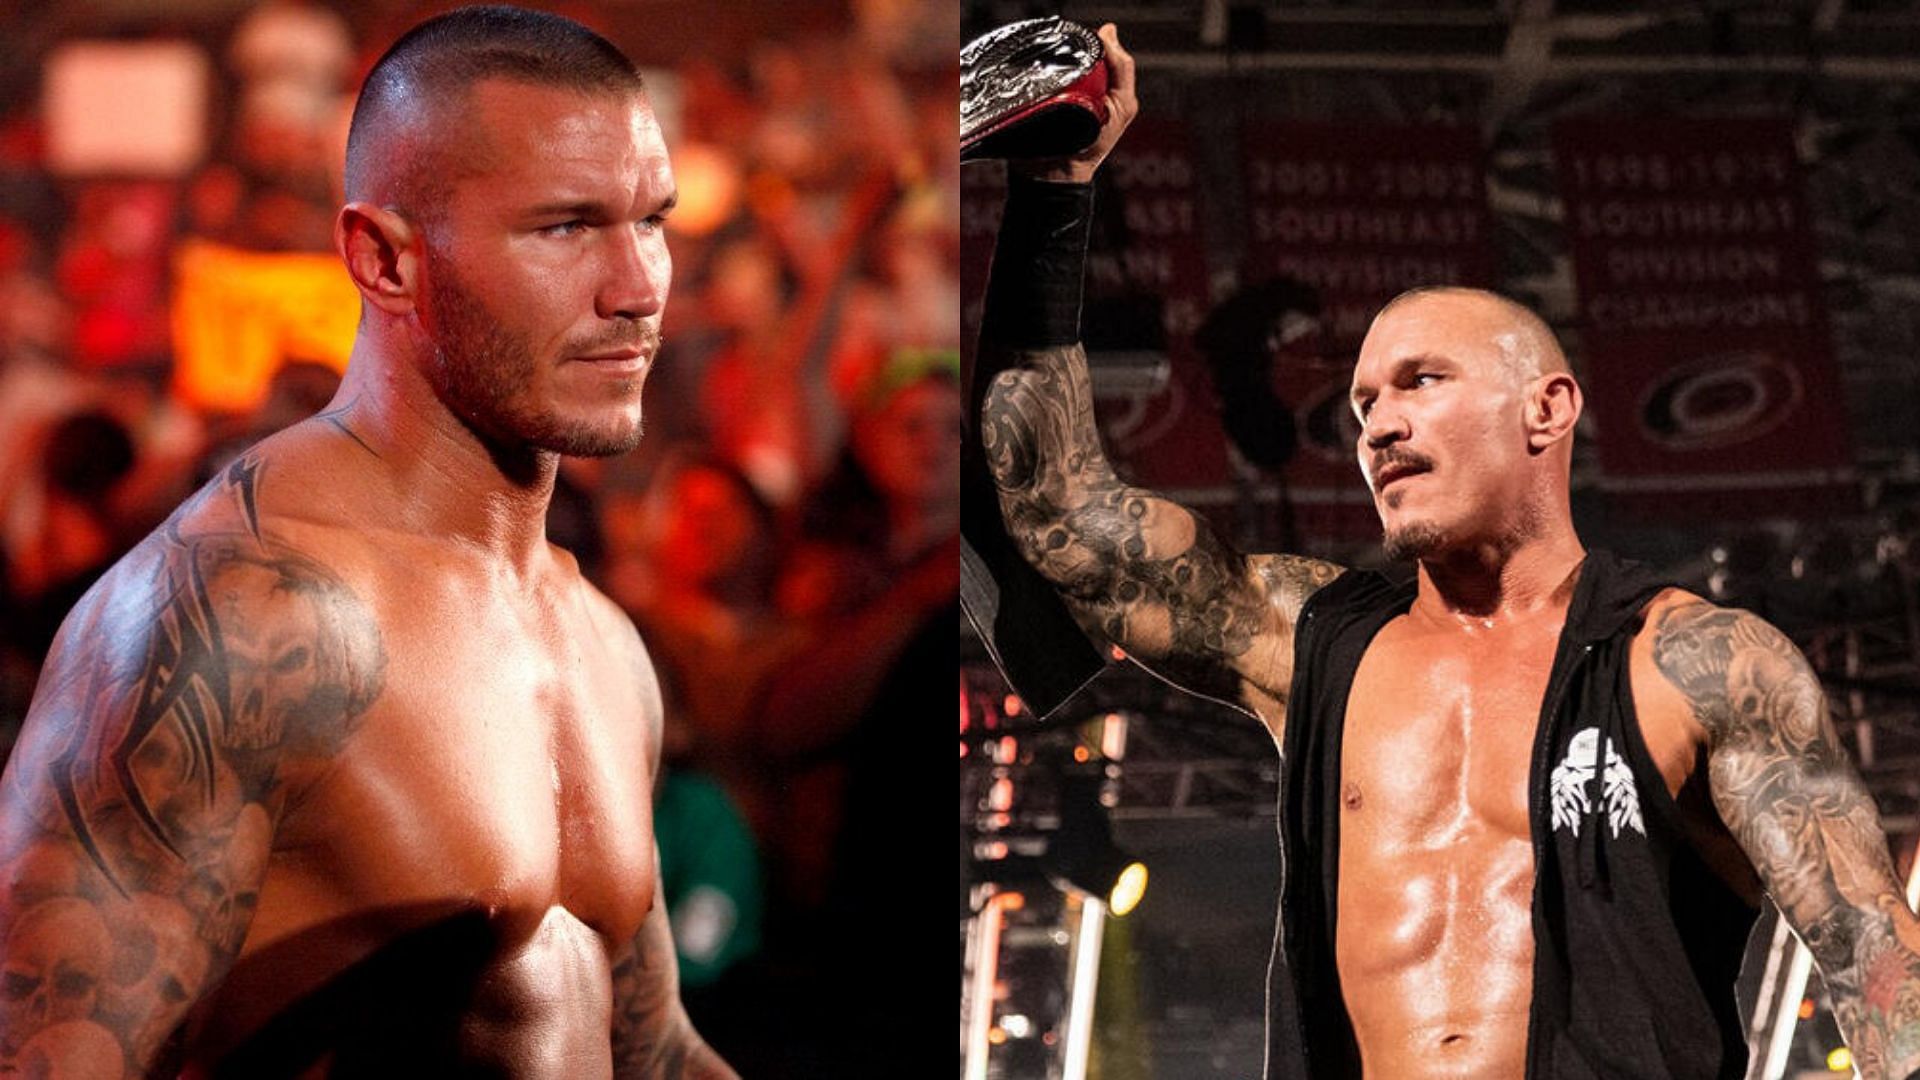 Randy Orton decided to take matters into his own hands